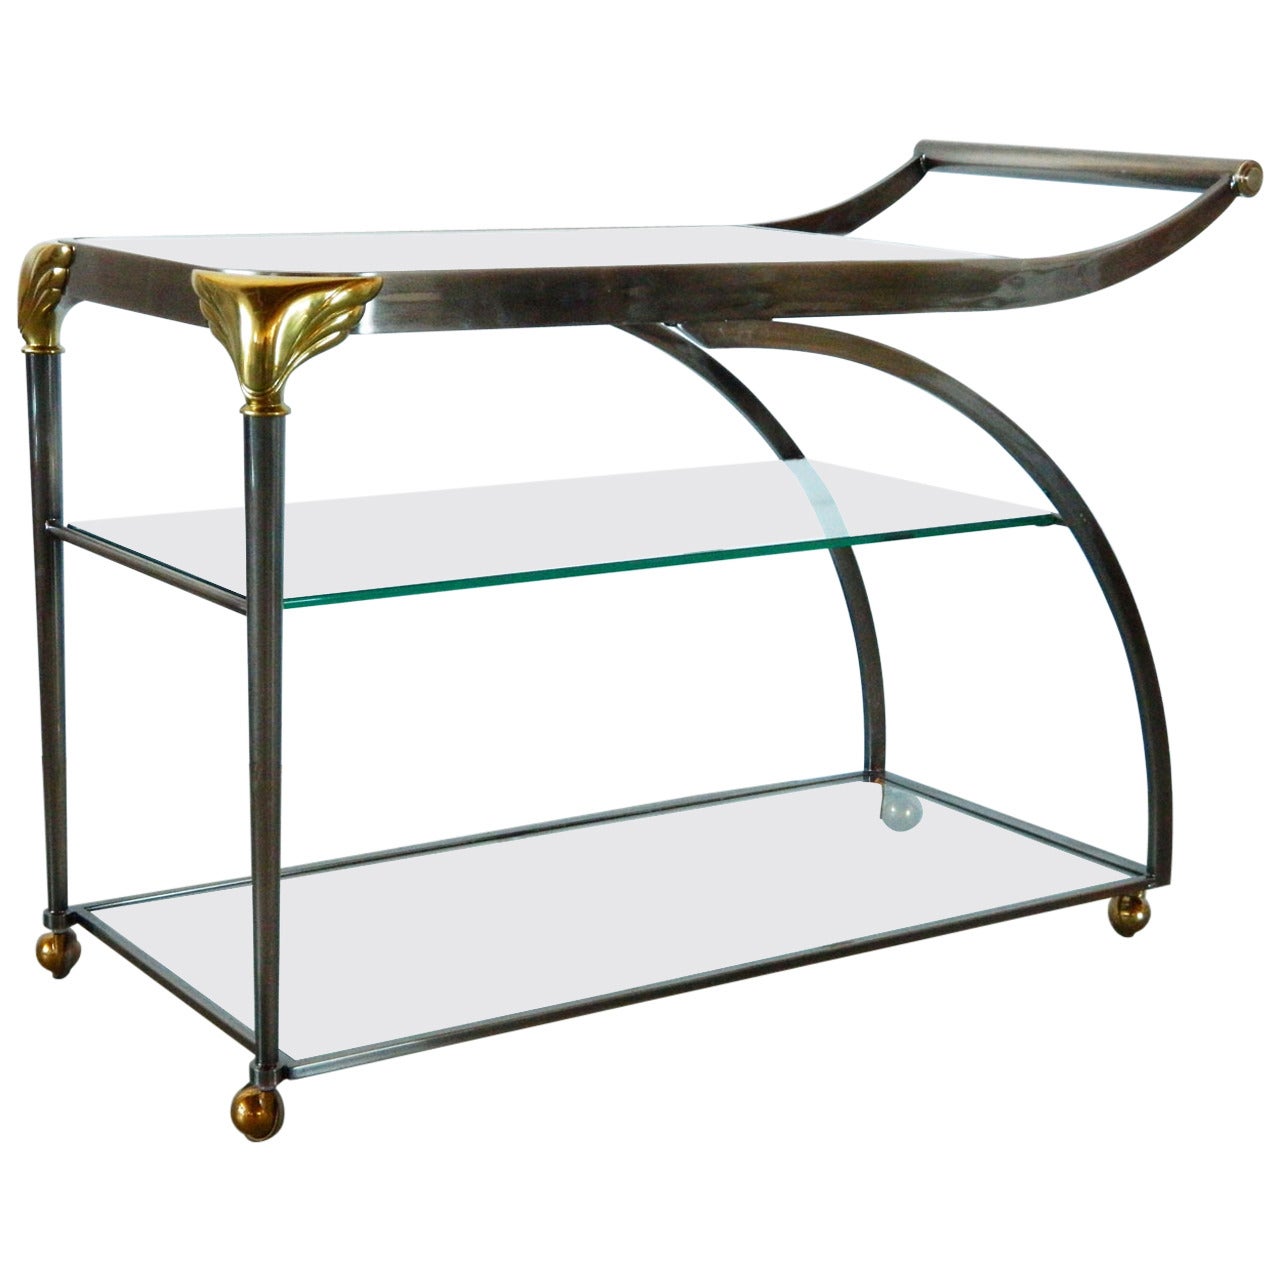 Deco-style Metal and Glass Bar Cart